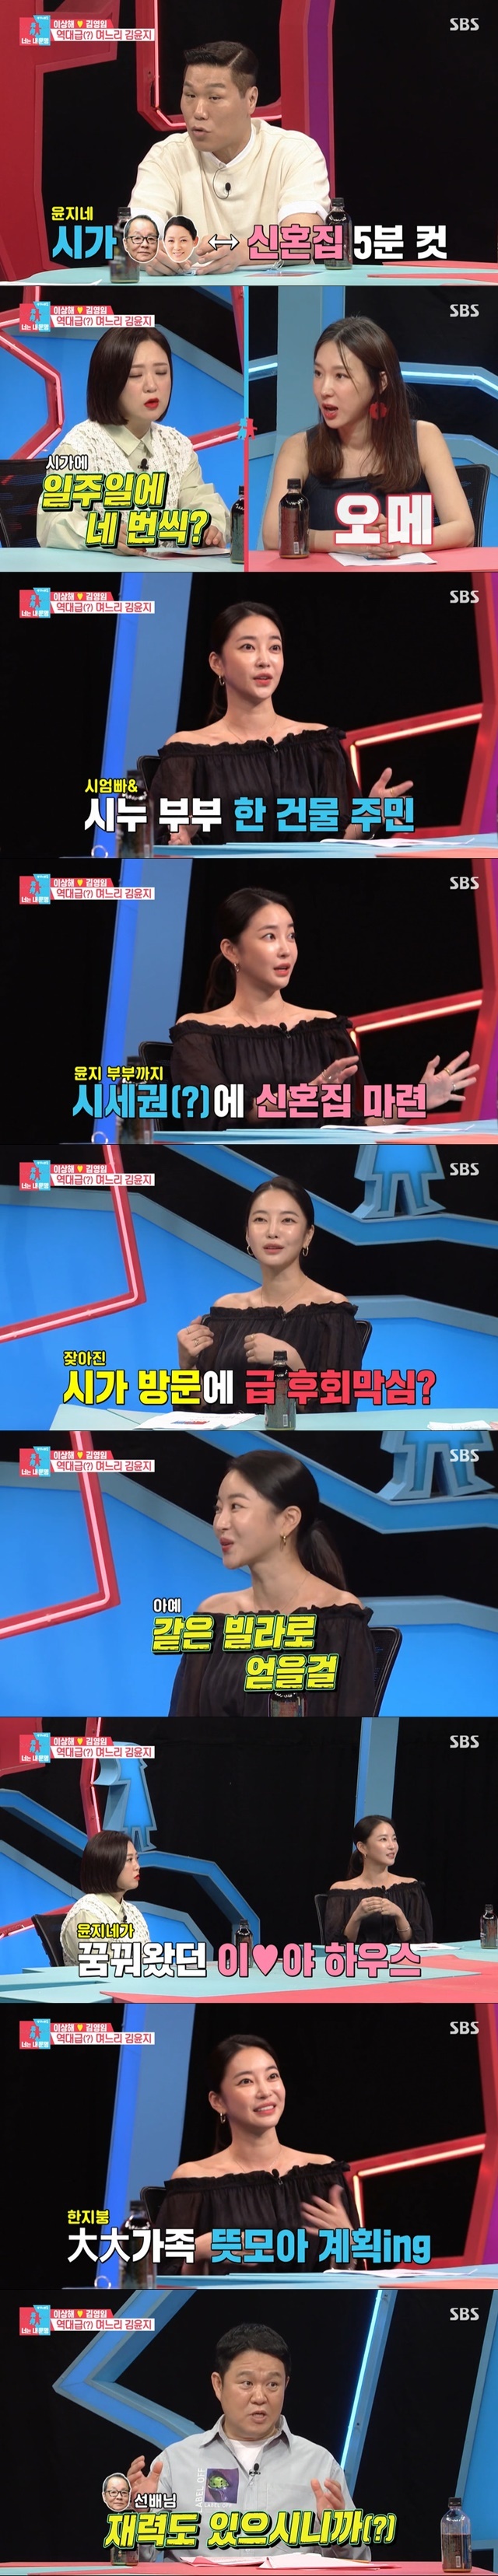 Comedian Lee Sang-haes Daughter-in-law revealed Kim Yoon-ji is going to Laws more than four times a week.Kim Yoon-ji appeared as a special MC on SBS Same Bed, Different Dreams 2 Season 2 - You Are My Destiny broadcast on August 30th.Kim Yoon-ji, who transformed from singer to actor, is a prospective bride who is about to marry on September 26.Kim Yoon-ji said that the prospective groom is Dads friend son and that the prospective parents are comedians and Kim Young-im.Kim Yoon-jis father and strange year are close enough to form a brotherhood. Kim Yoon-ji first met a five-year-old prospective groom in elementary school, and in the United States, she met again in high school and love sprouted.Kim Yoon-ji said, I was so cool to meet again when I was 19 years old. I was at first sight.On the other hand, the prospective groom said that Kim Yoon-jis first impression, which he met again, was like an angel.But the reason was because he made white makeup on his dark skin and reminded him of Kabuki makeup.Kim Yoon-ji said, I taught Golf casually and said, Why do not you meet us seriously?Kim Yoon-ji said, I told my parents that I was dating, and when I was about three months old, I ate a can of beer with my brother and me, visited my mothers father and said, I will live and marry. Kim Yoon-ji said, My mother said Oh my baby about the reaction of her prospective parents.My father said, I think my sons daughter is getting married, so I am so good, because he was so beautiful like my daughter.Kim Yoon-ji then mentioned the meeting with his wife and wife Kim Moo-yeol and Yoon Seung-ah, saying, I spent a while with my sister Young-ah.Ive been close for over ten years. Four have seen. My sister has seen four and texted me late at night.I thought you met him well because you texted me that you were happy that you seemed comfortable. Kim Yoon-jis cousin is Kara Kang Jiyoung. Kim Yoon-ji says, Kang Jiyoung is my uncles daughter.Ji-youngs older sister married Ji Dong-won, he explained to the entertainers families.Kim Yoon-ji then showed his envy by watching Lee Ji-hoons 18-member large family live in a villa and said, My parents live in the same building as my sister-in-law and sister-in-law, walking to five minutes street Laws more than four times a week.We live on foot in the five minutes street villa, and I thought I was wrong because I went too often. I will get it from the same villa. 